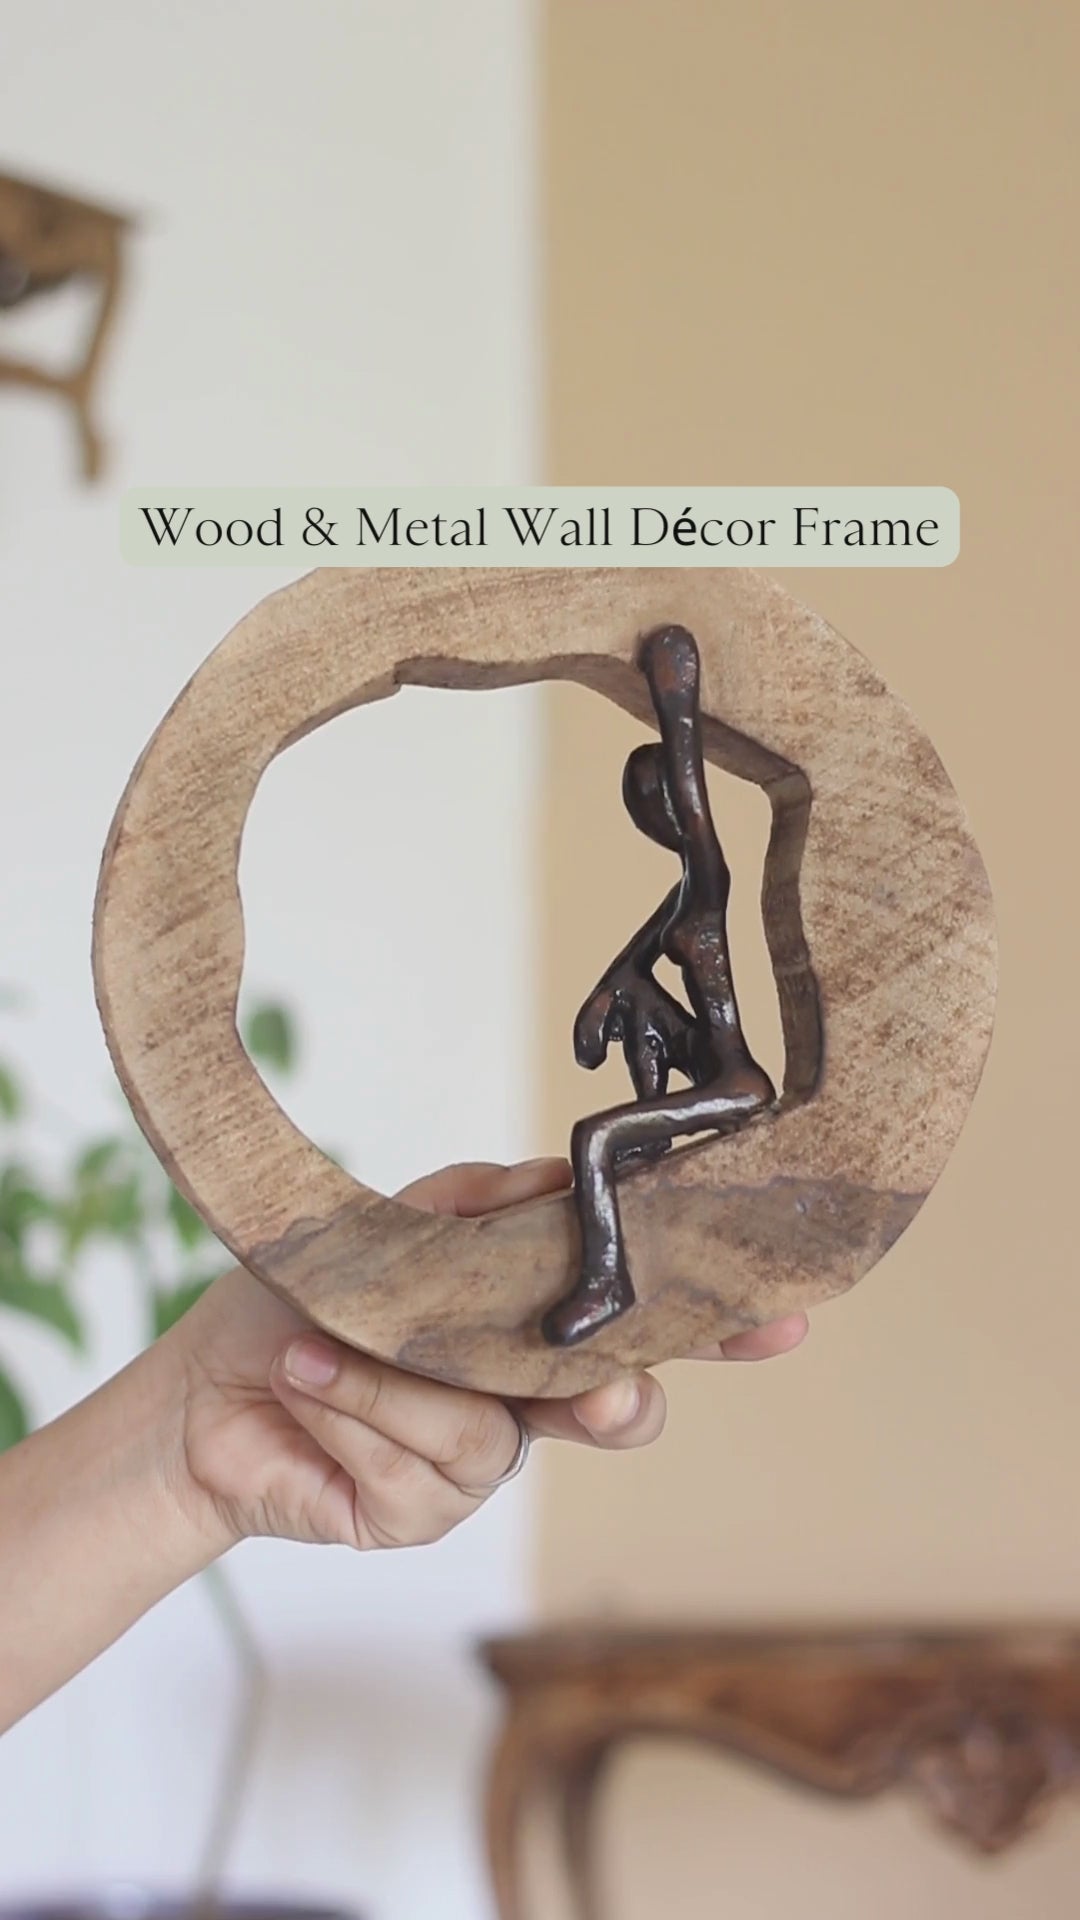 Rise Wood & Metal Wall Décor Frame